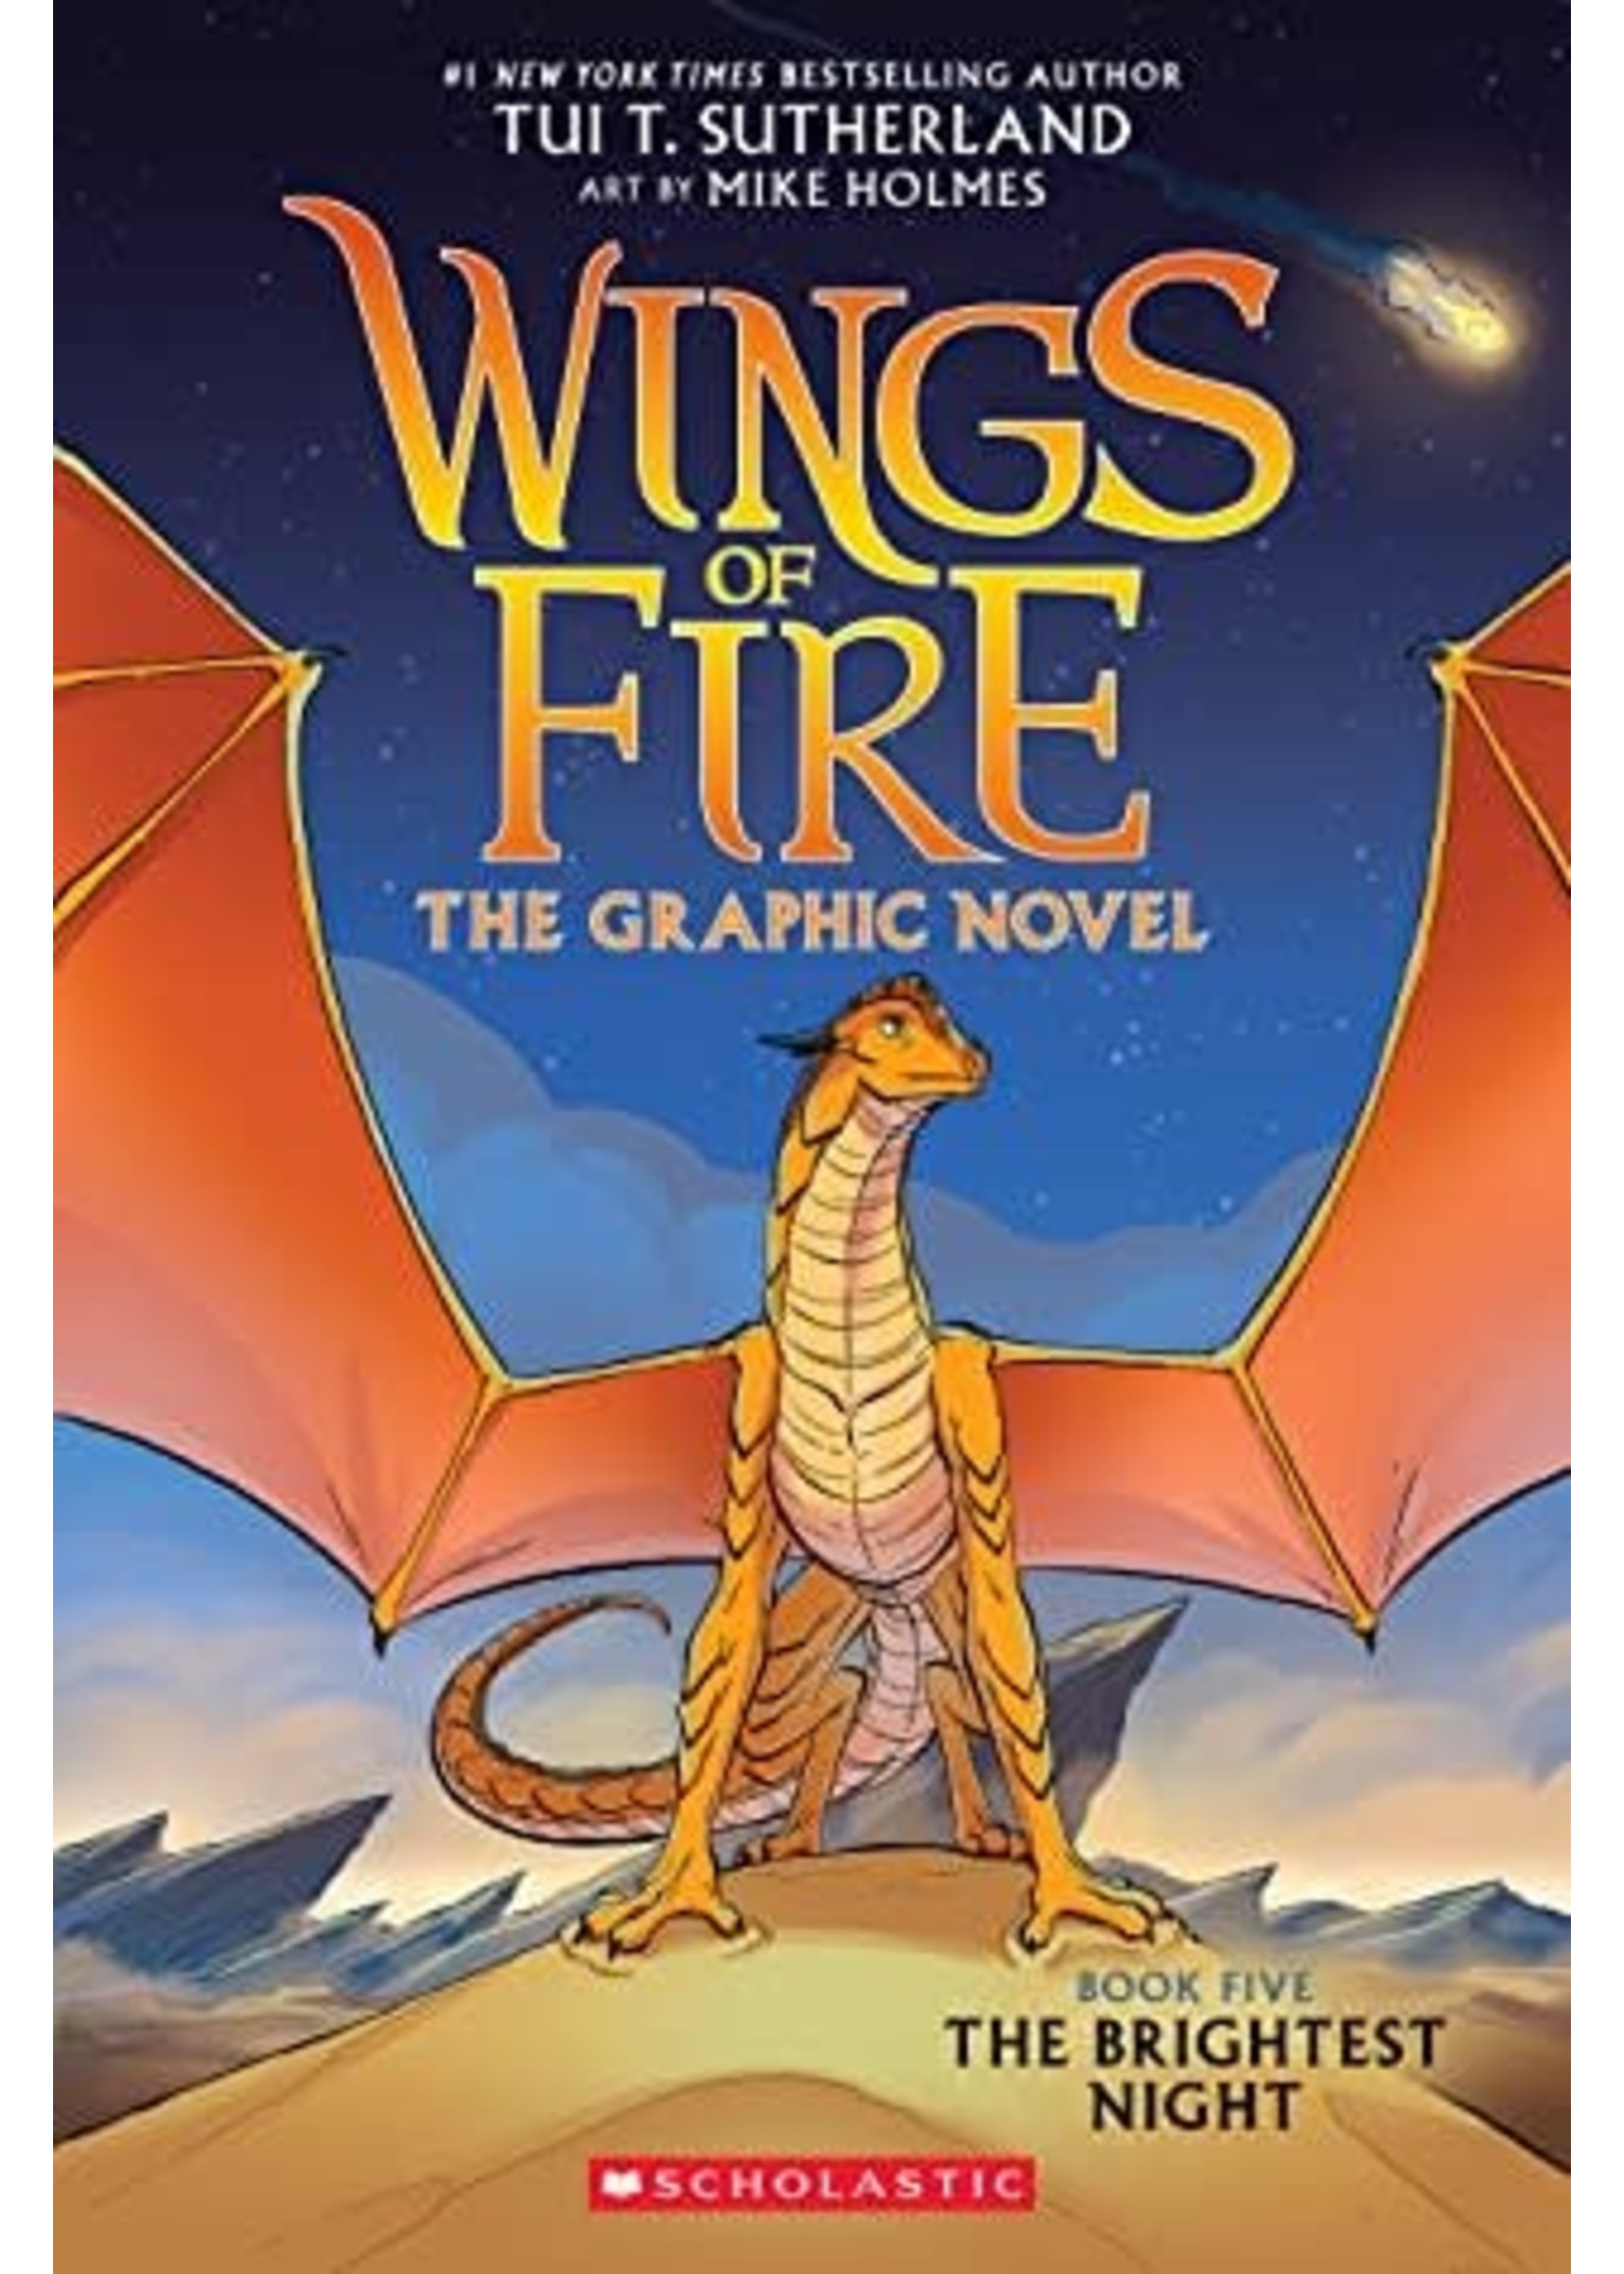 The Brightest Night : A Graphix Book (Wings of Fire Graphic Novel #5) by Tui T. Sutherland, Mike Holmes